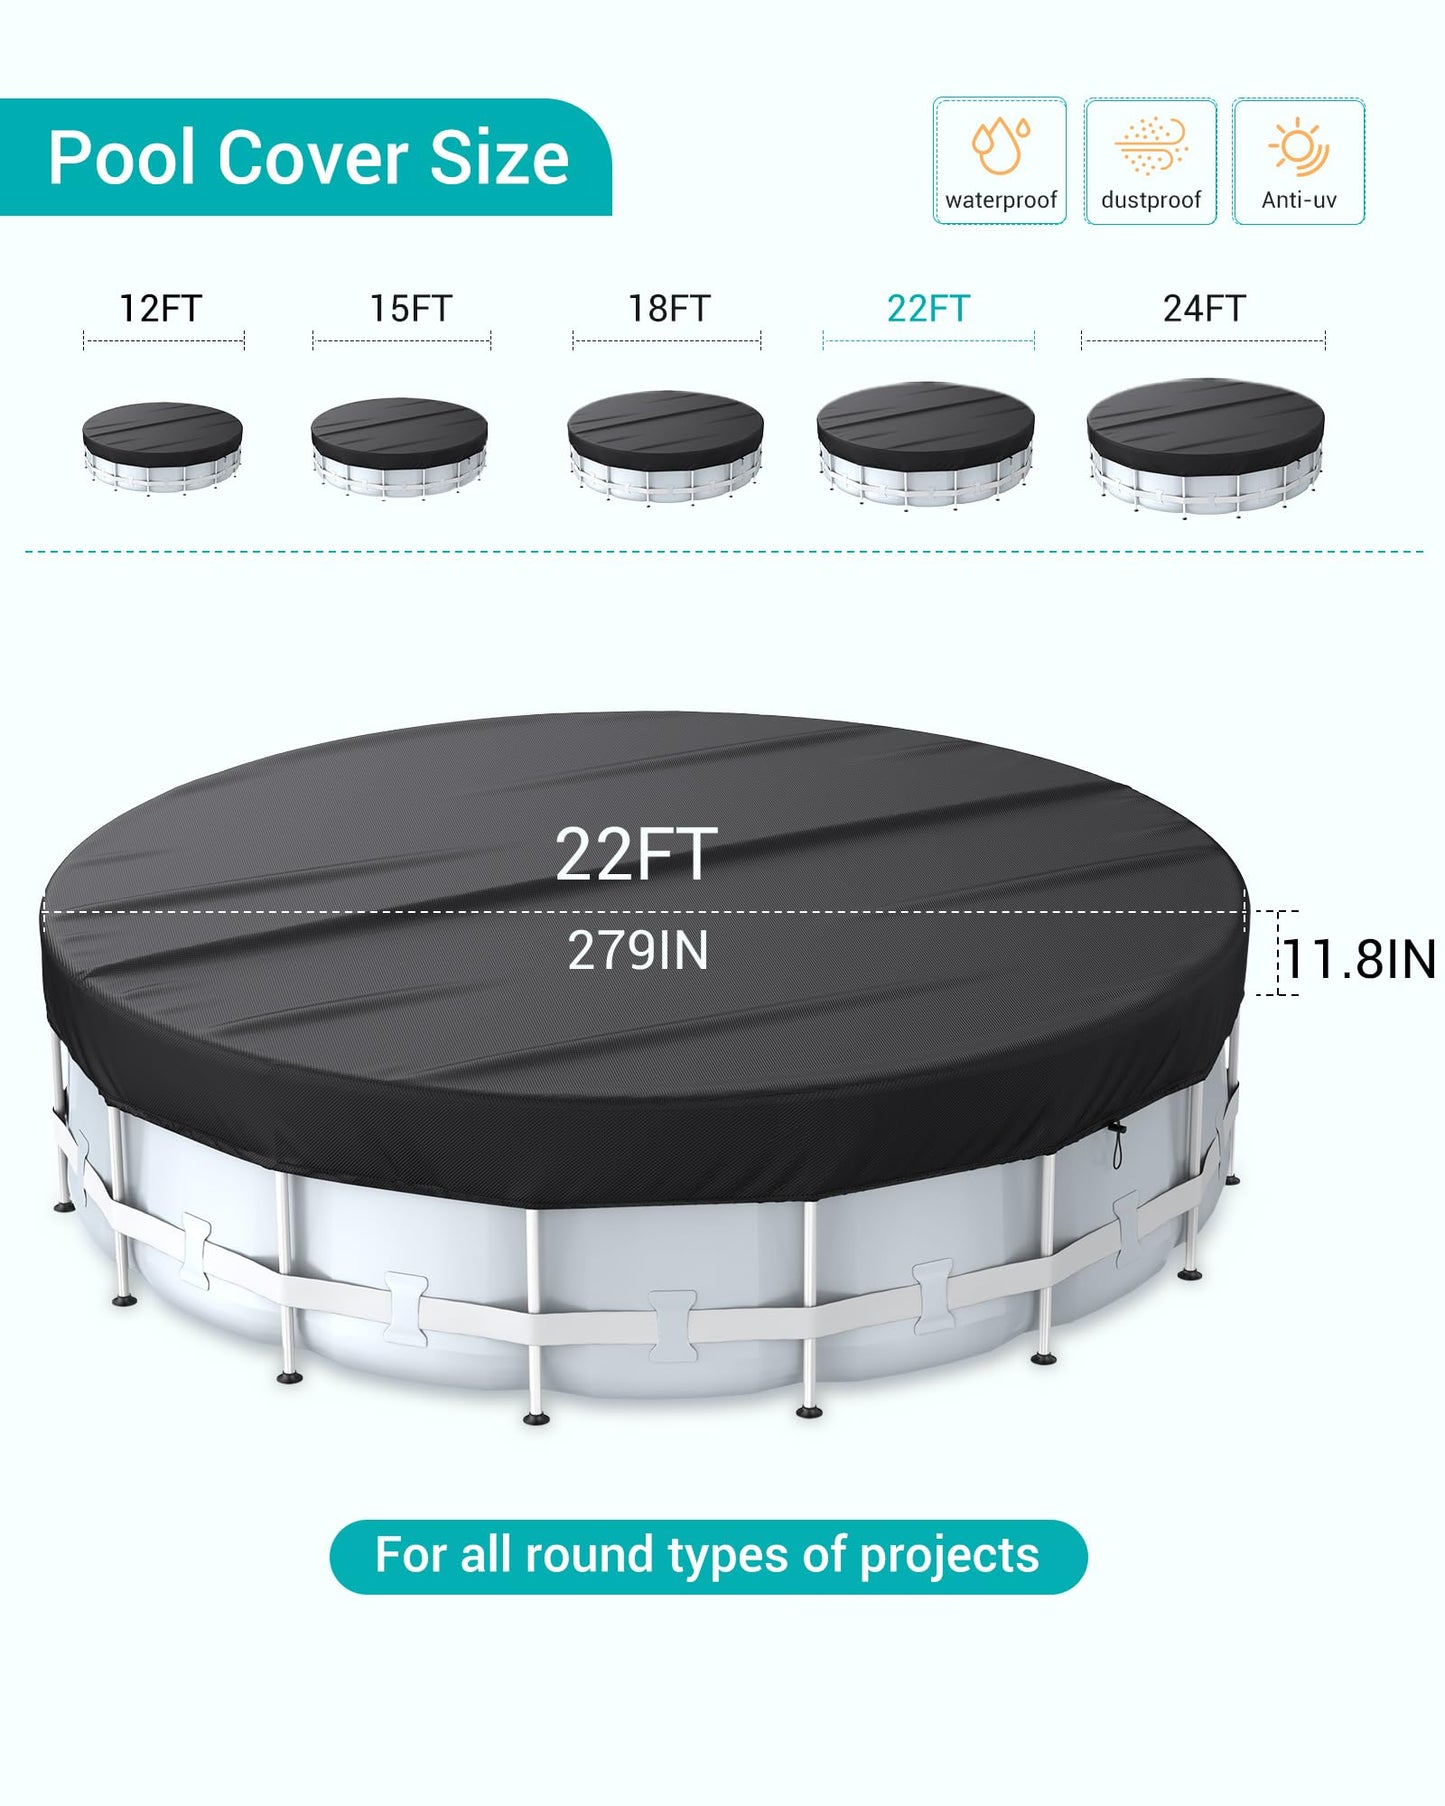 BROSYDA Round Pool Cover, 22 Ft Swimming Pool Cover for Above Ground Pools, Hot Tub Cover, Heavy Duty Pool Cover with Ground Nails, Tension Hook, Drawstring (Black)